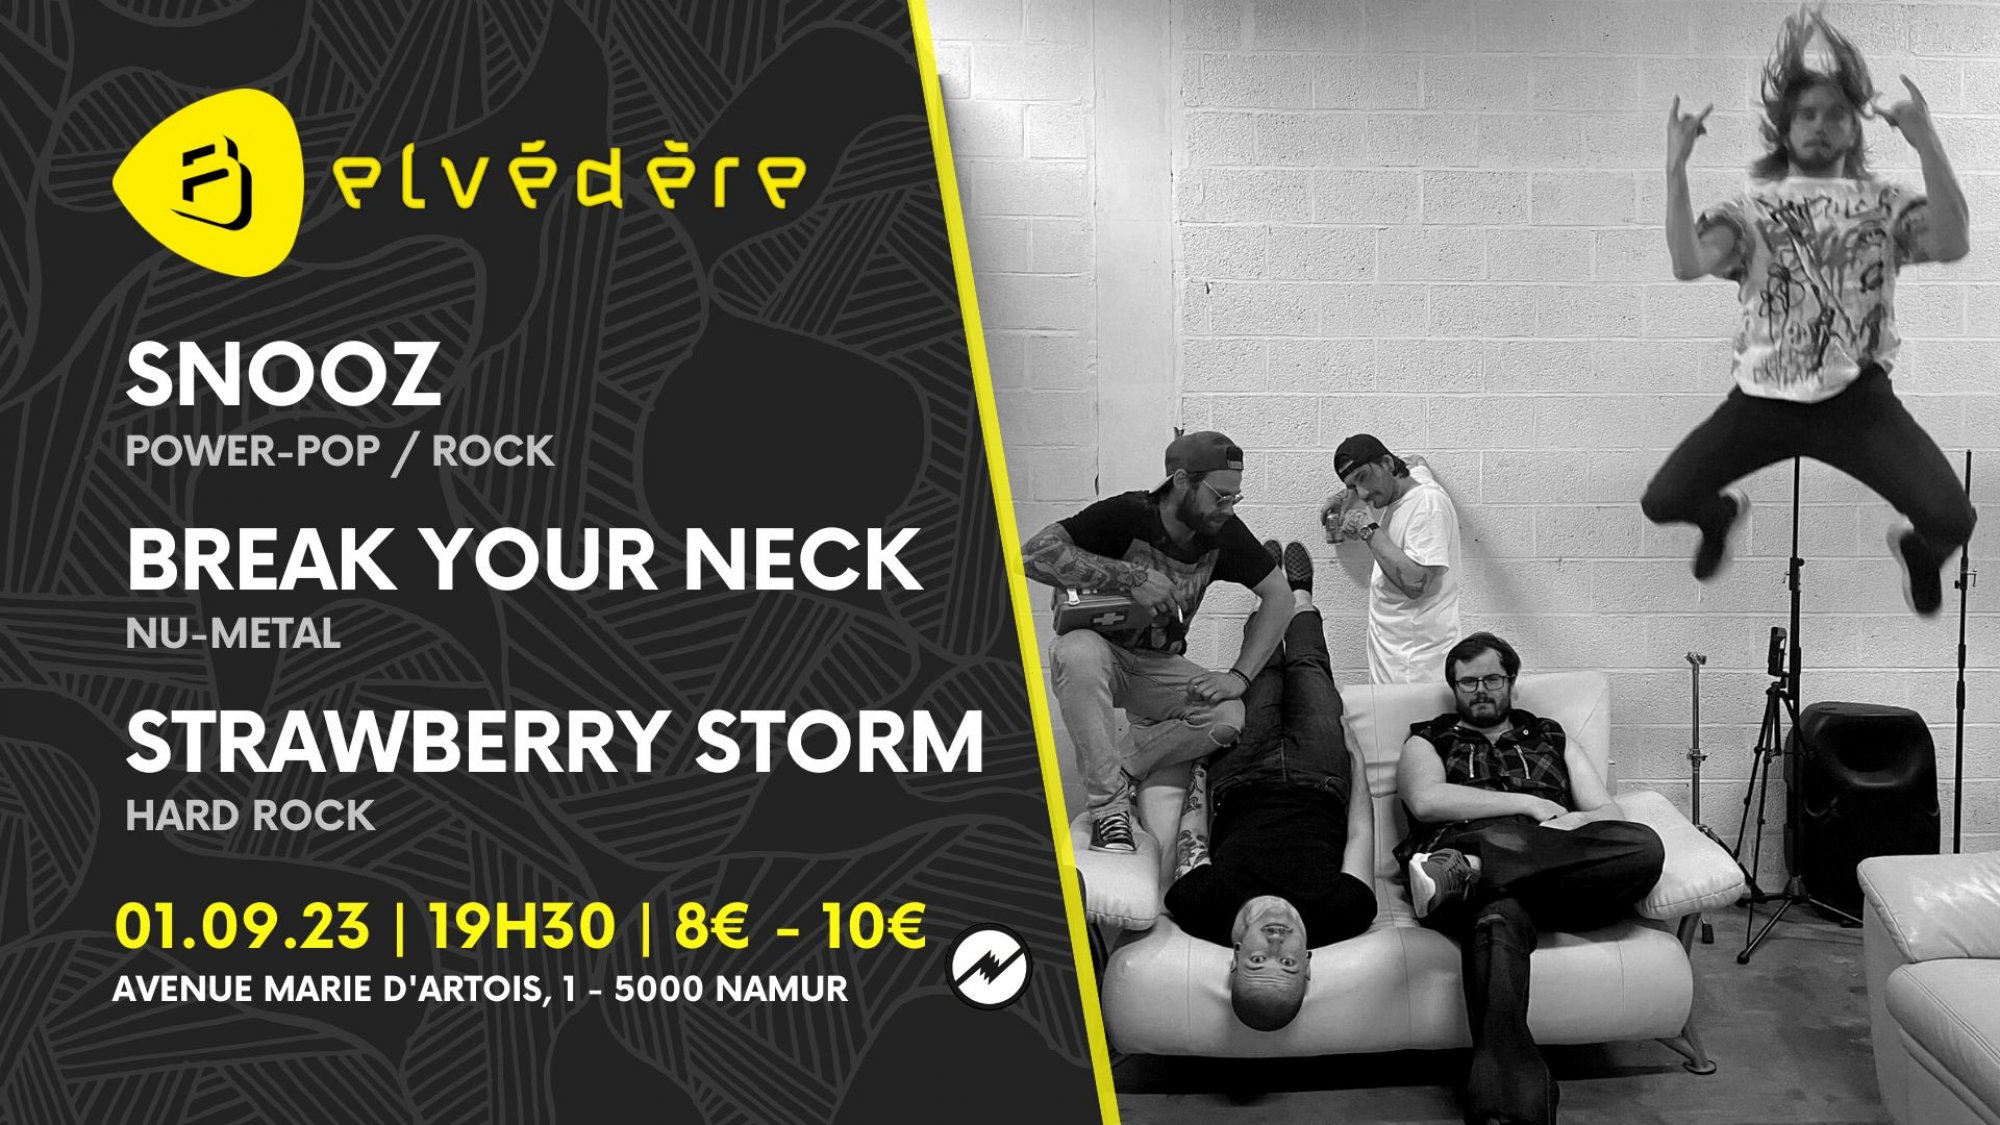 STRAWBERRY STORM (BE) | BREAK YOUR NECK | SNOOZE (BE)  RELEASE PARTY